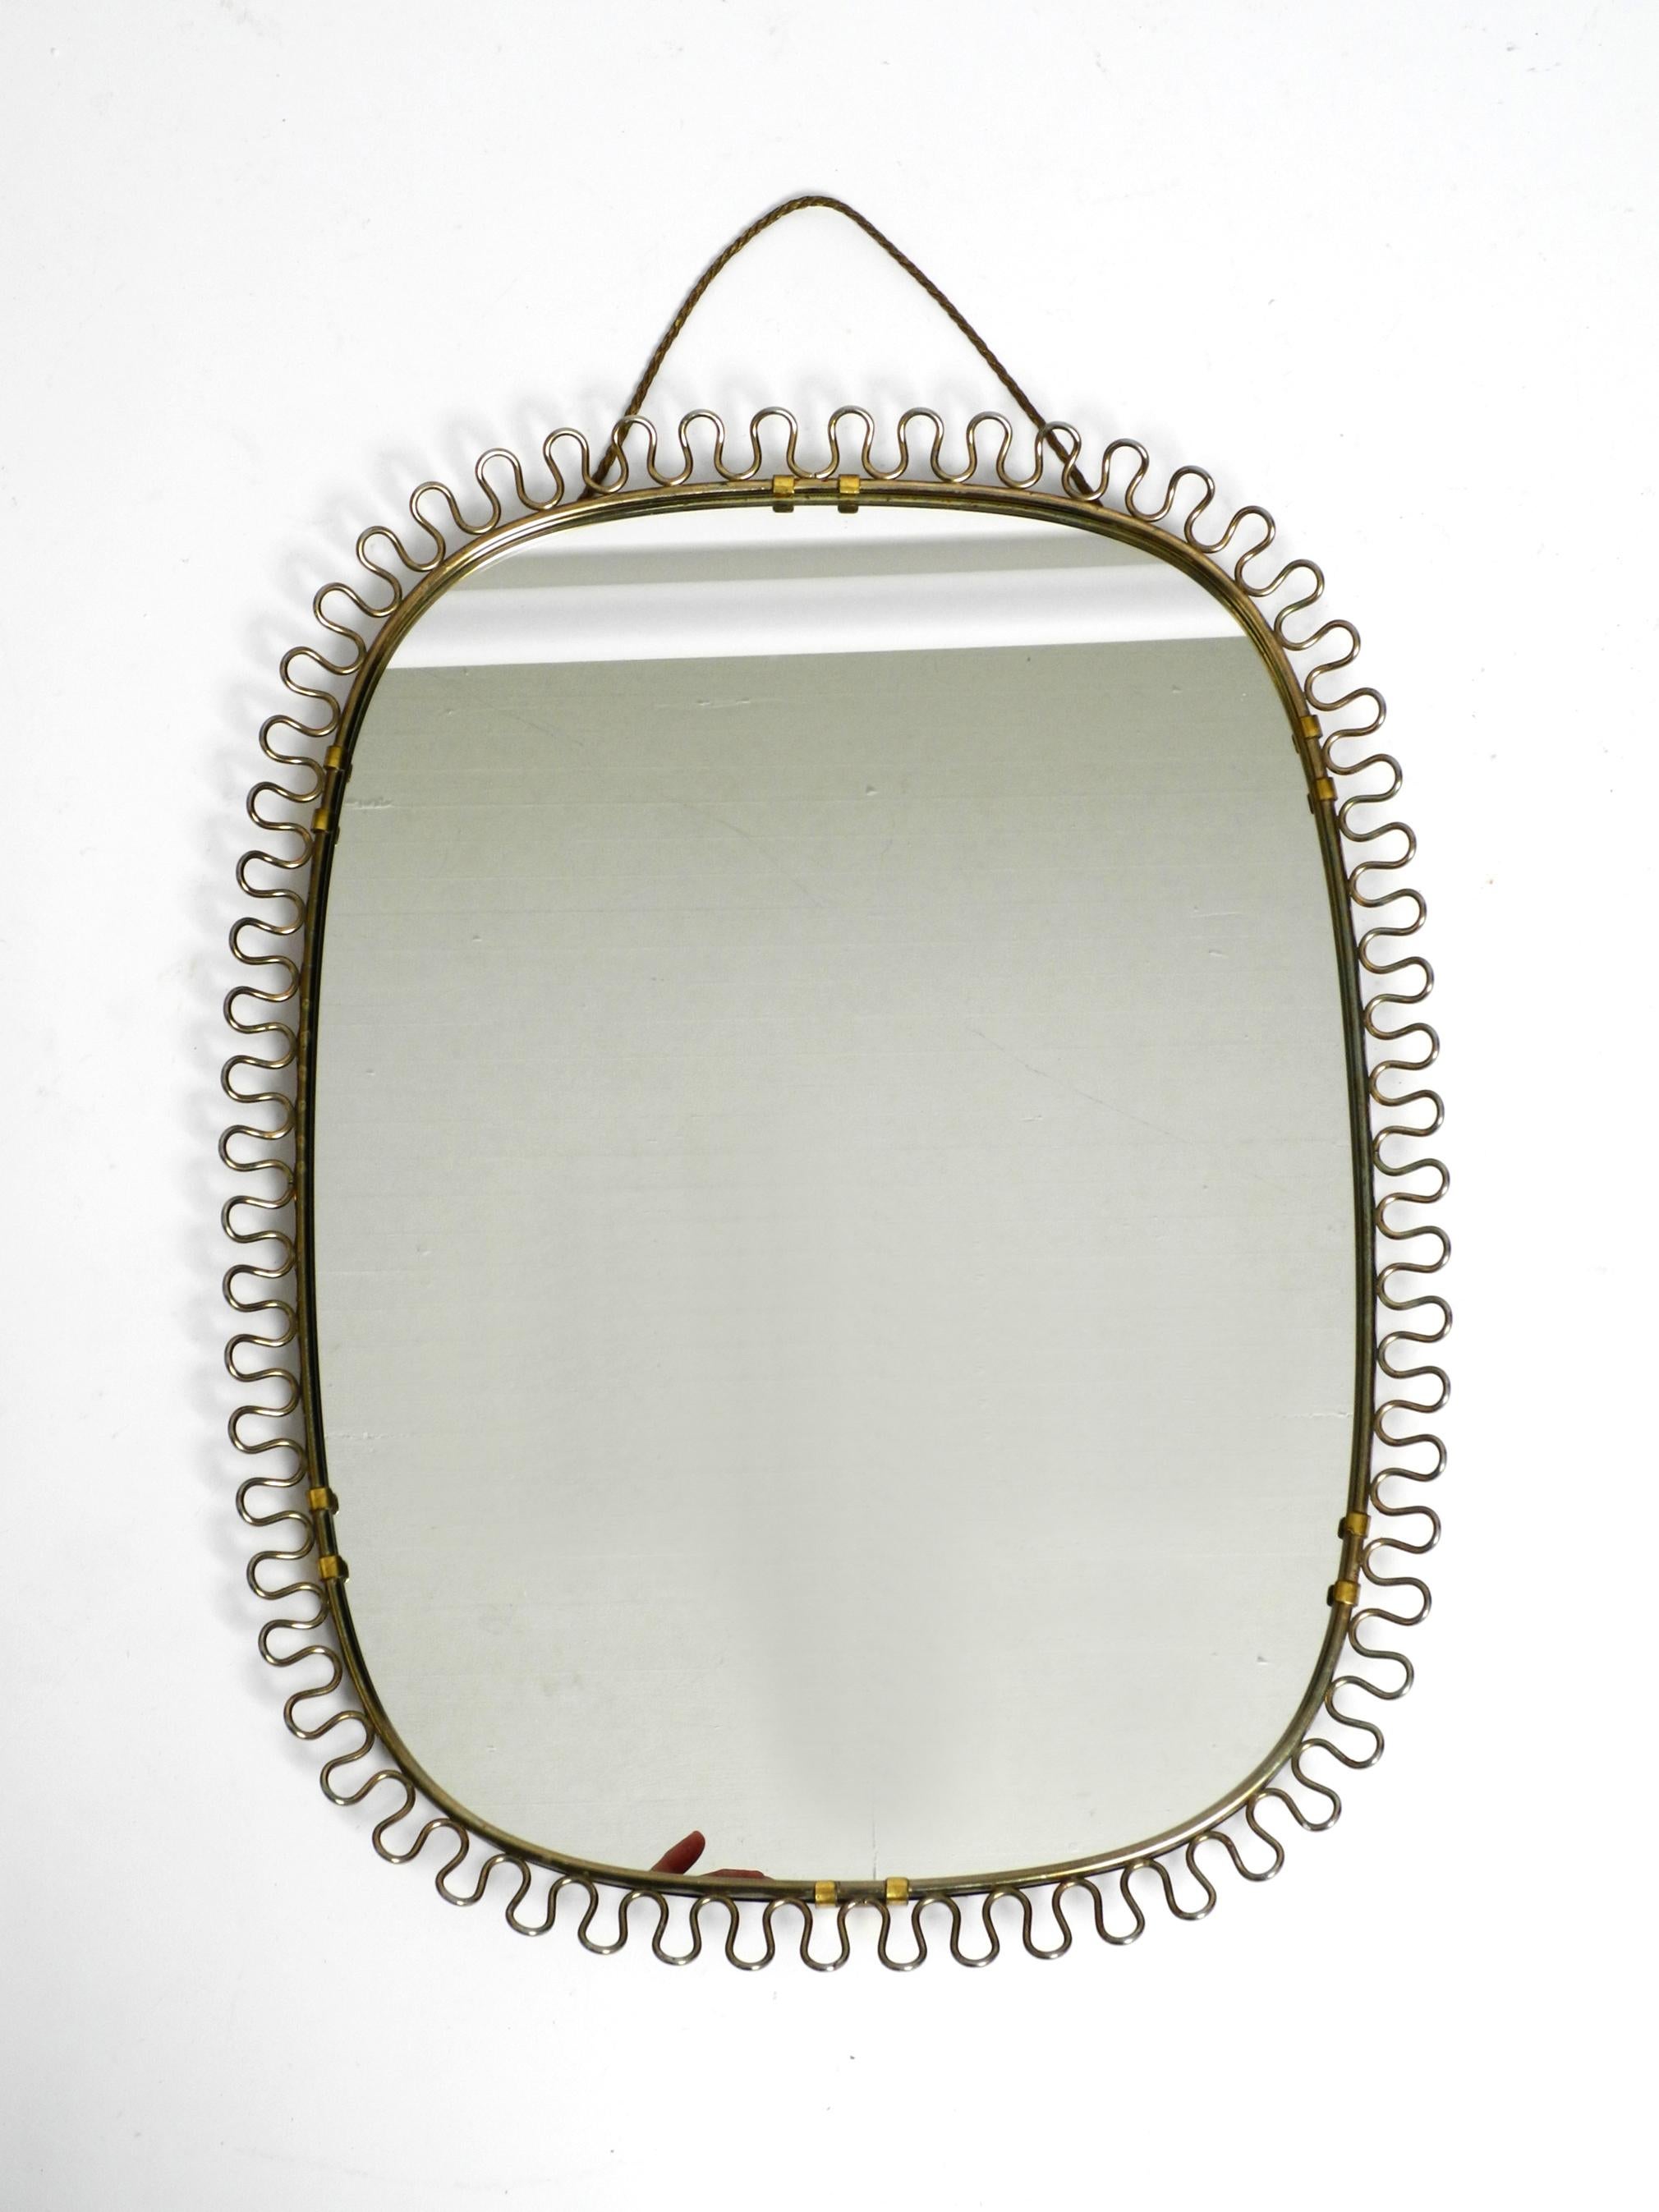 Small, heavy Mid Century wall mirror with a frame with gold colored metal loops 10